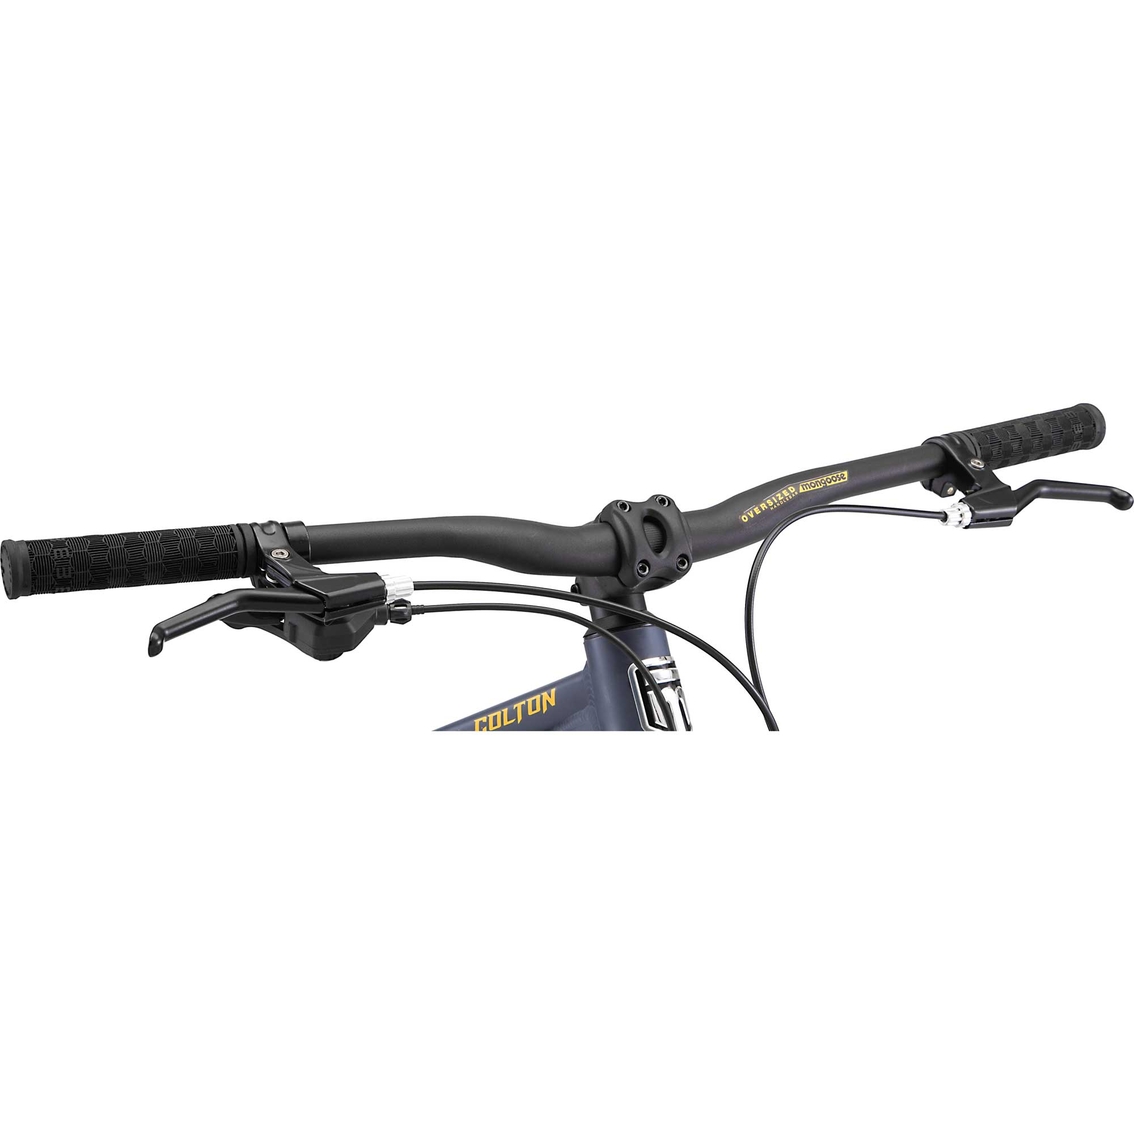 Mongoose 27.5 in. Colton Mountain Front Suspension Bike - Image 3 of 5